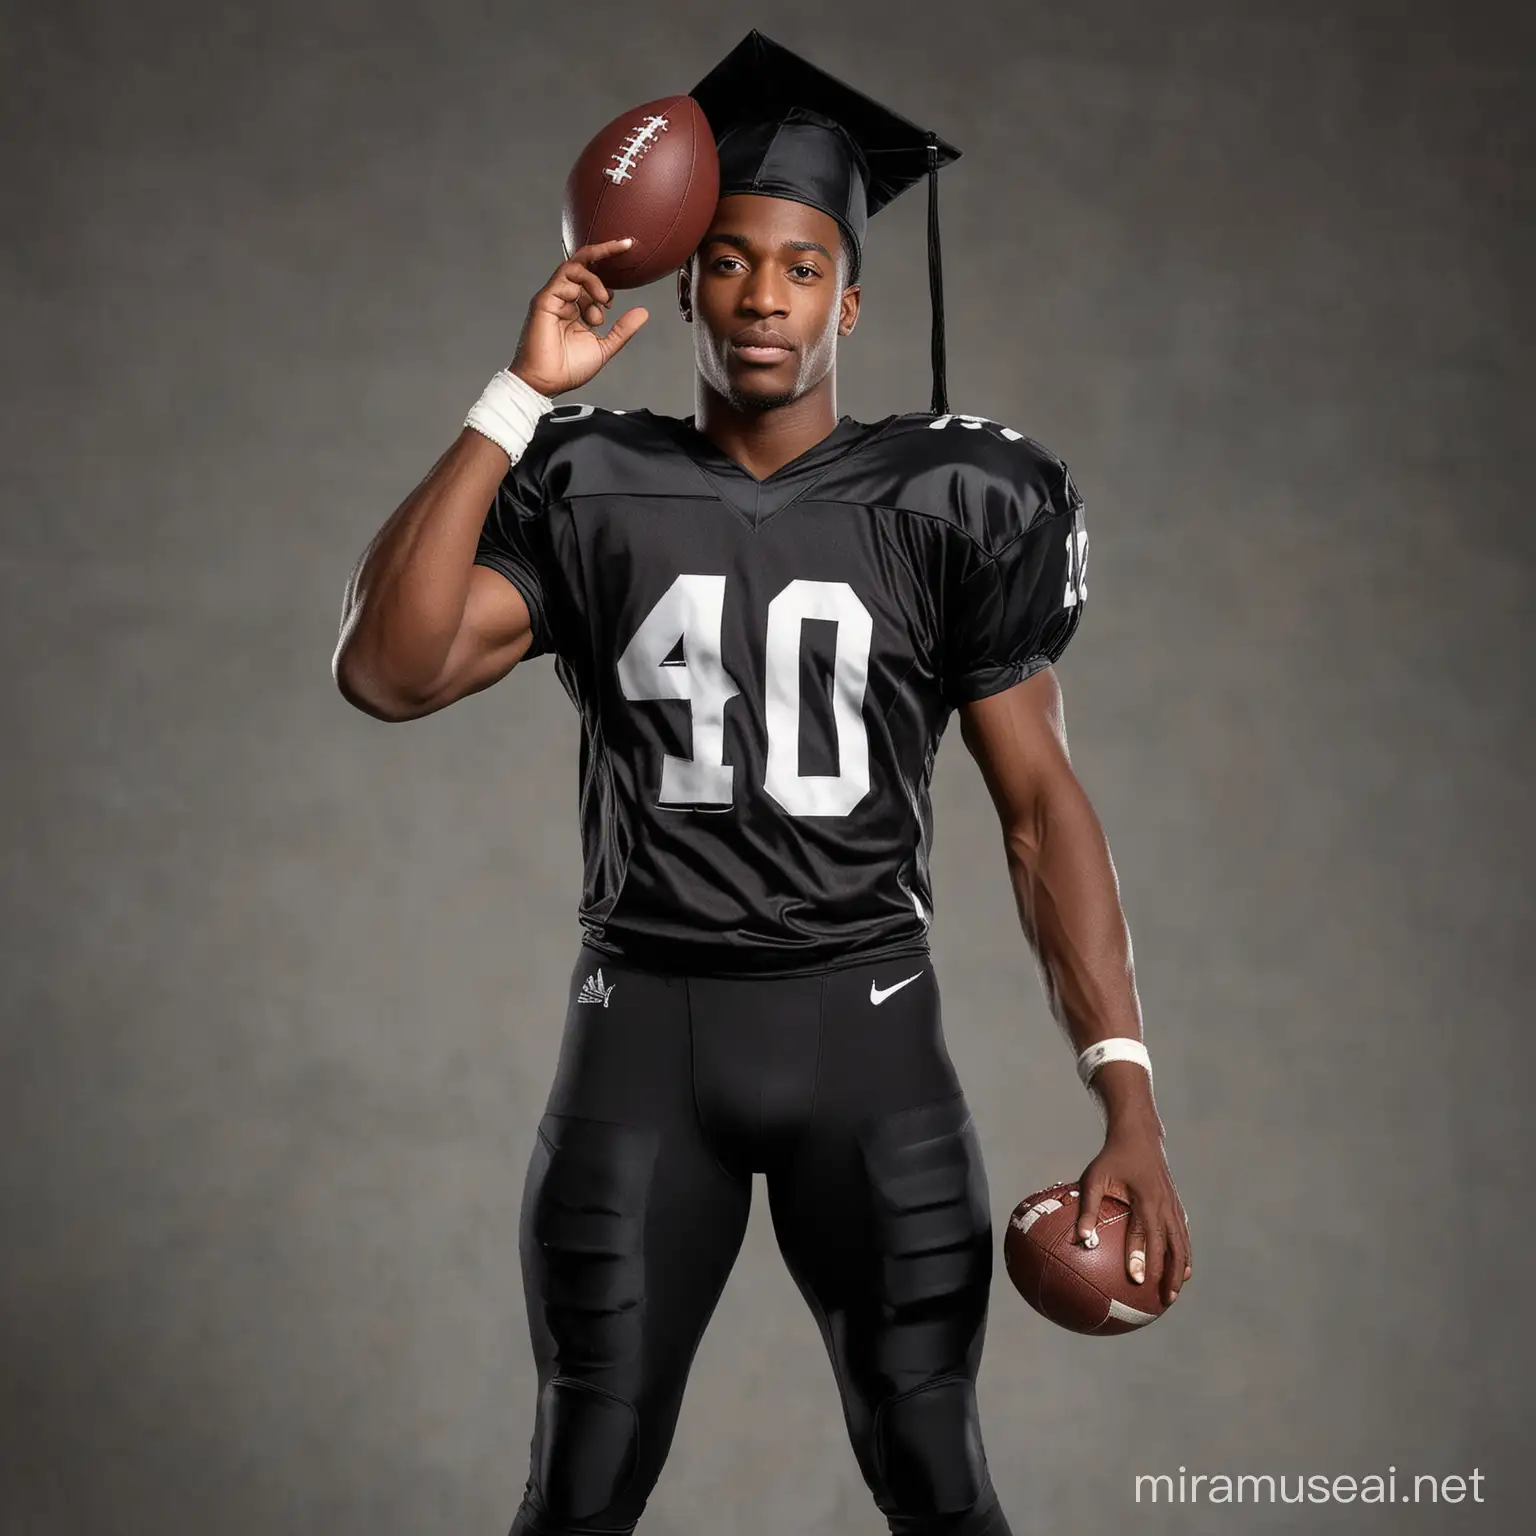 Strong African American Football Player with Graduation Cap